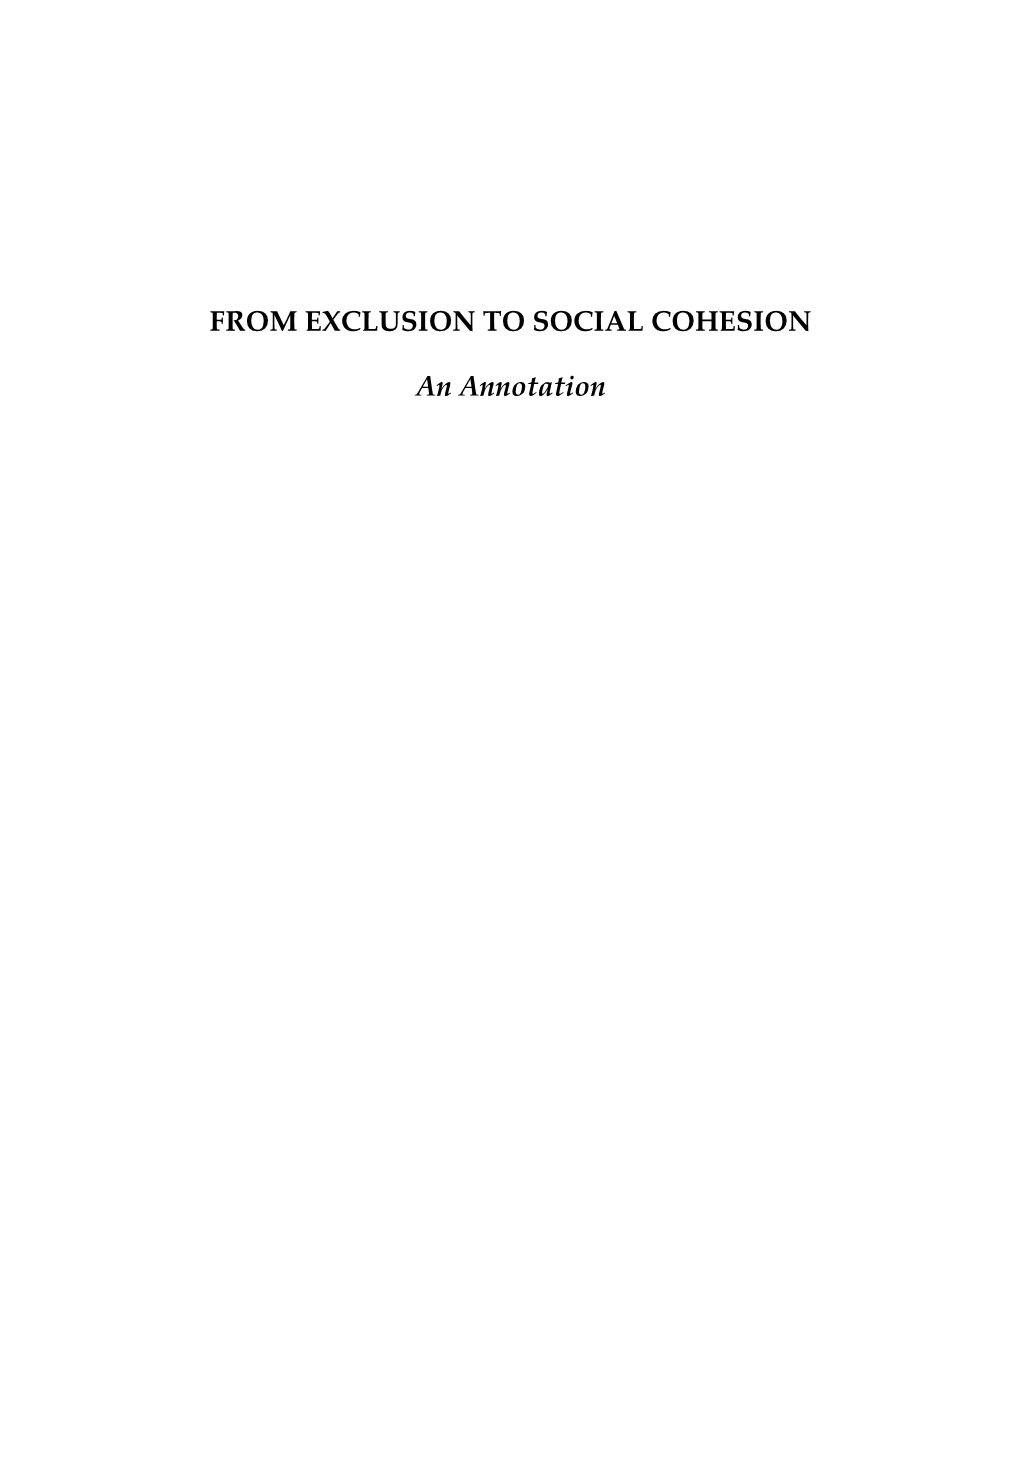 FROM EXCLUSION to SOCIAL COHESION an Annotation